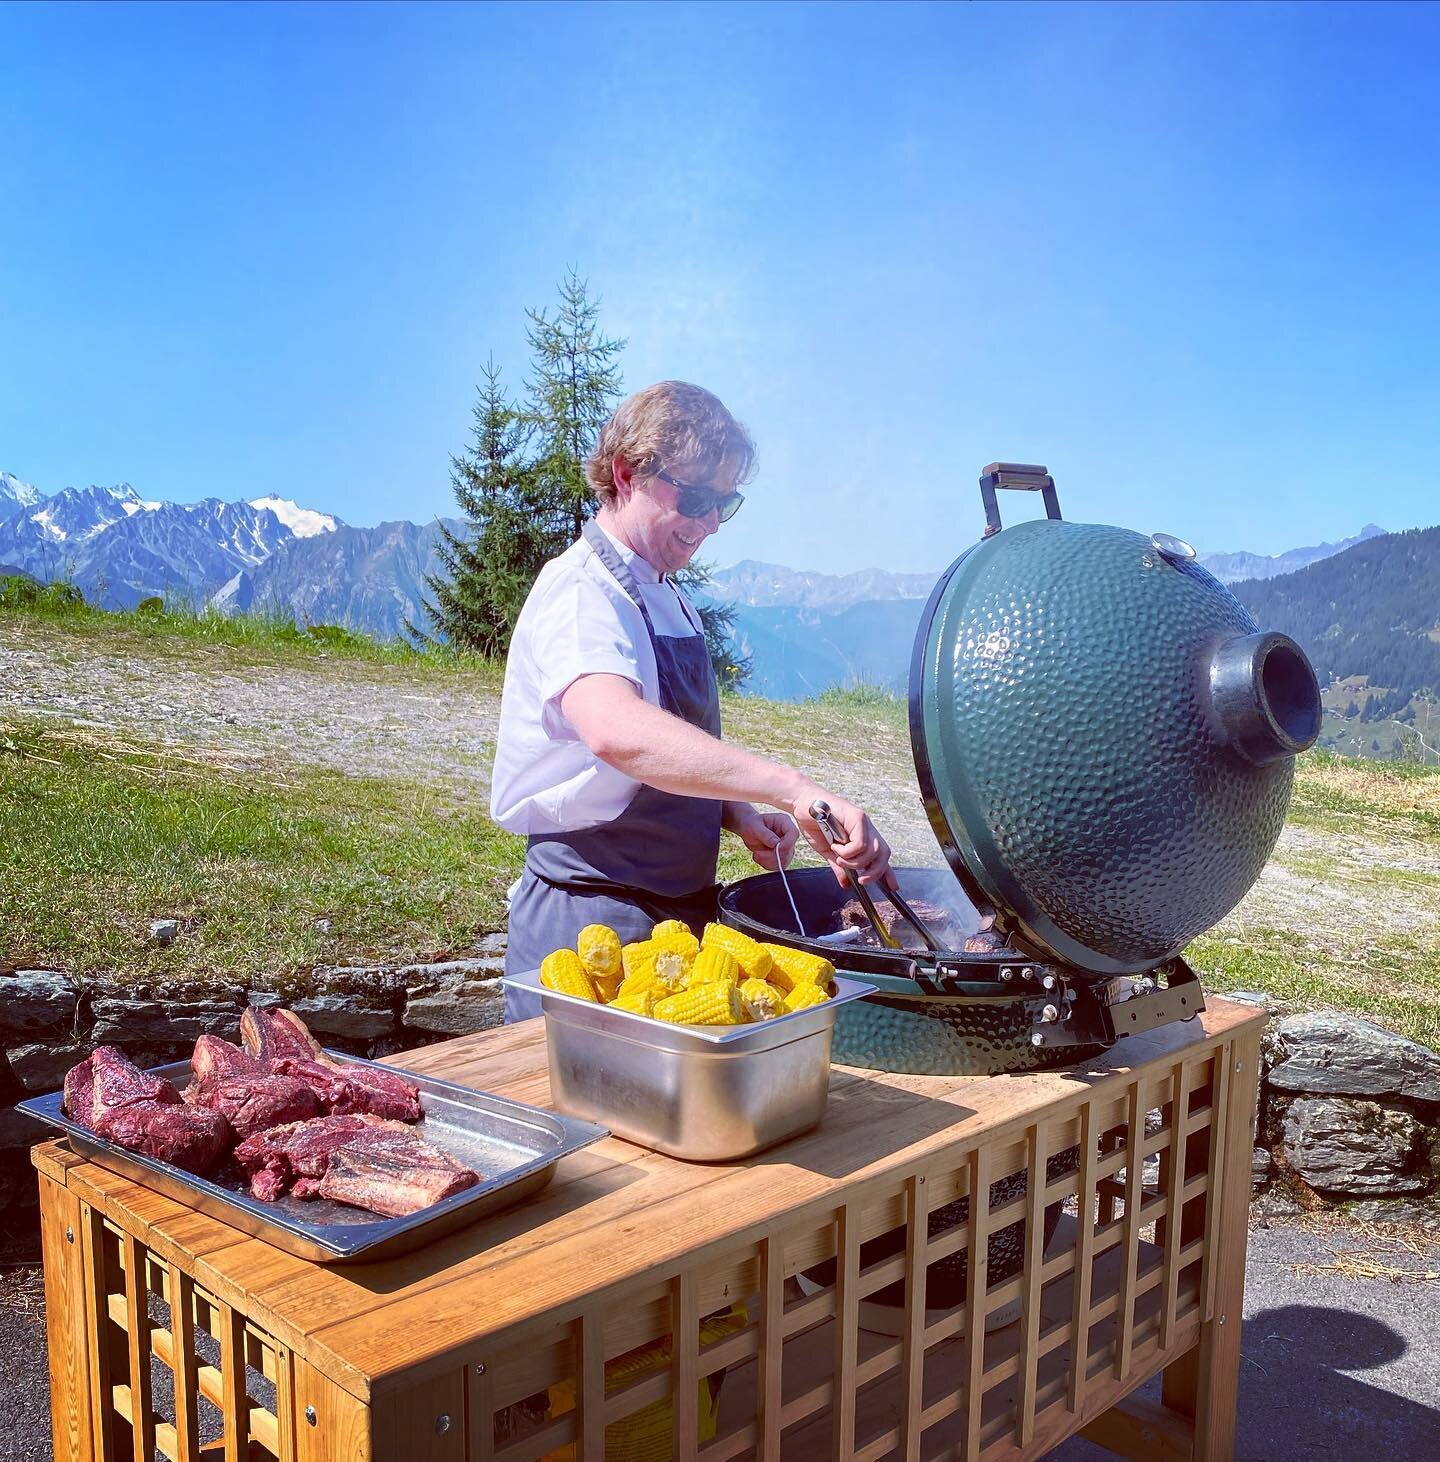 Super excited to be planning some fantastic events for this summer in verbier  #verbier #verbierevents #verbierweddings #destinationweddings #bagnes #summer #bbq